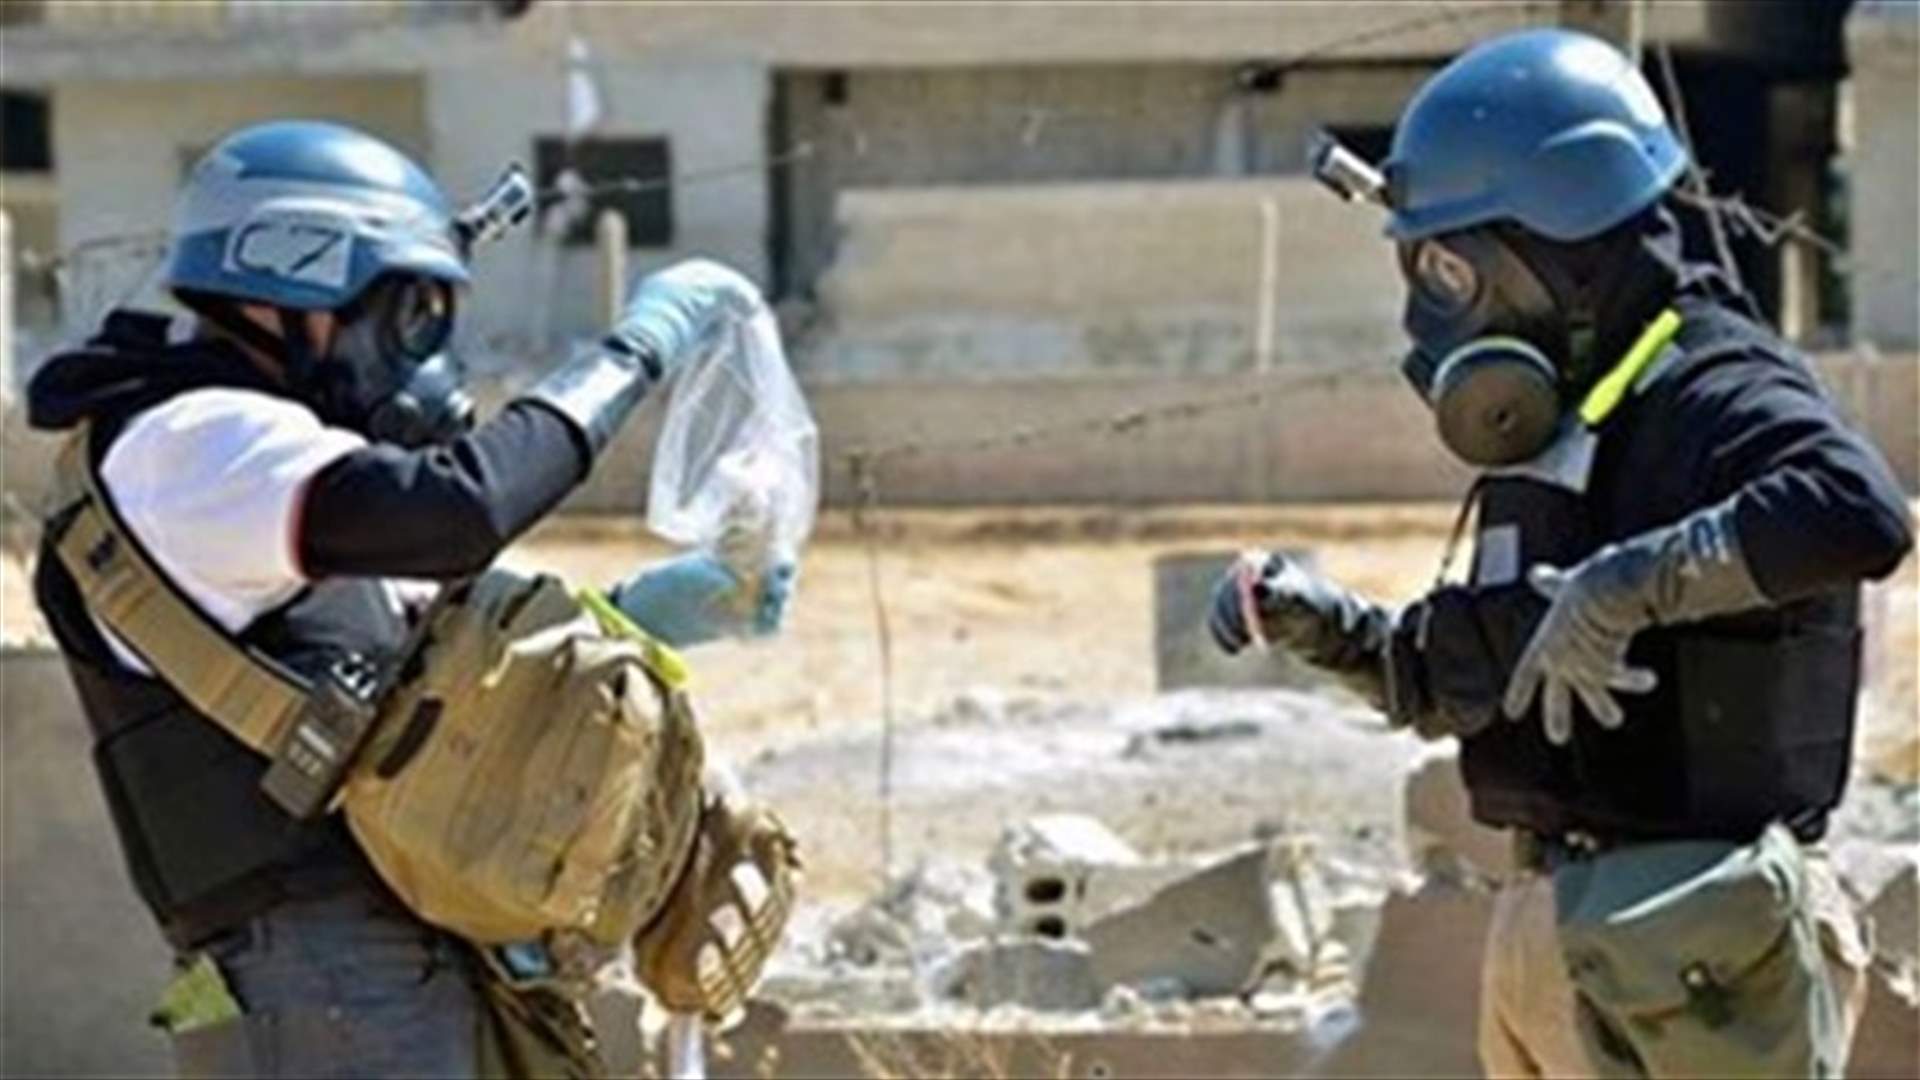 UN Security Council to vote on Syria sanctions over chemical weapons -diplomats